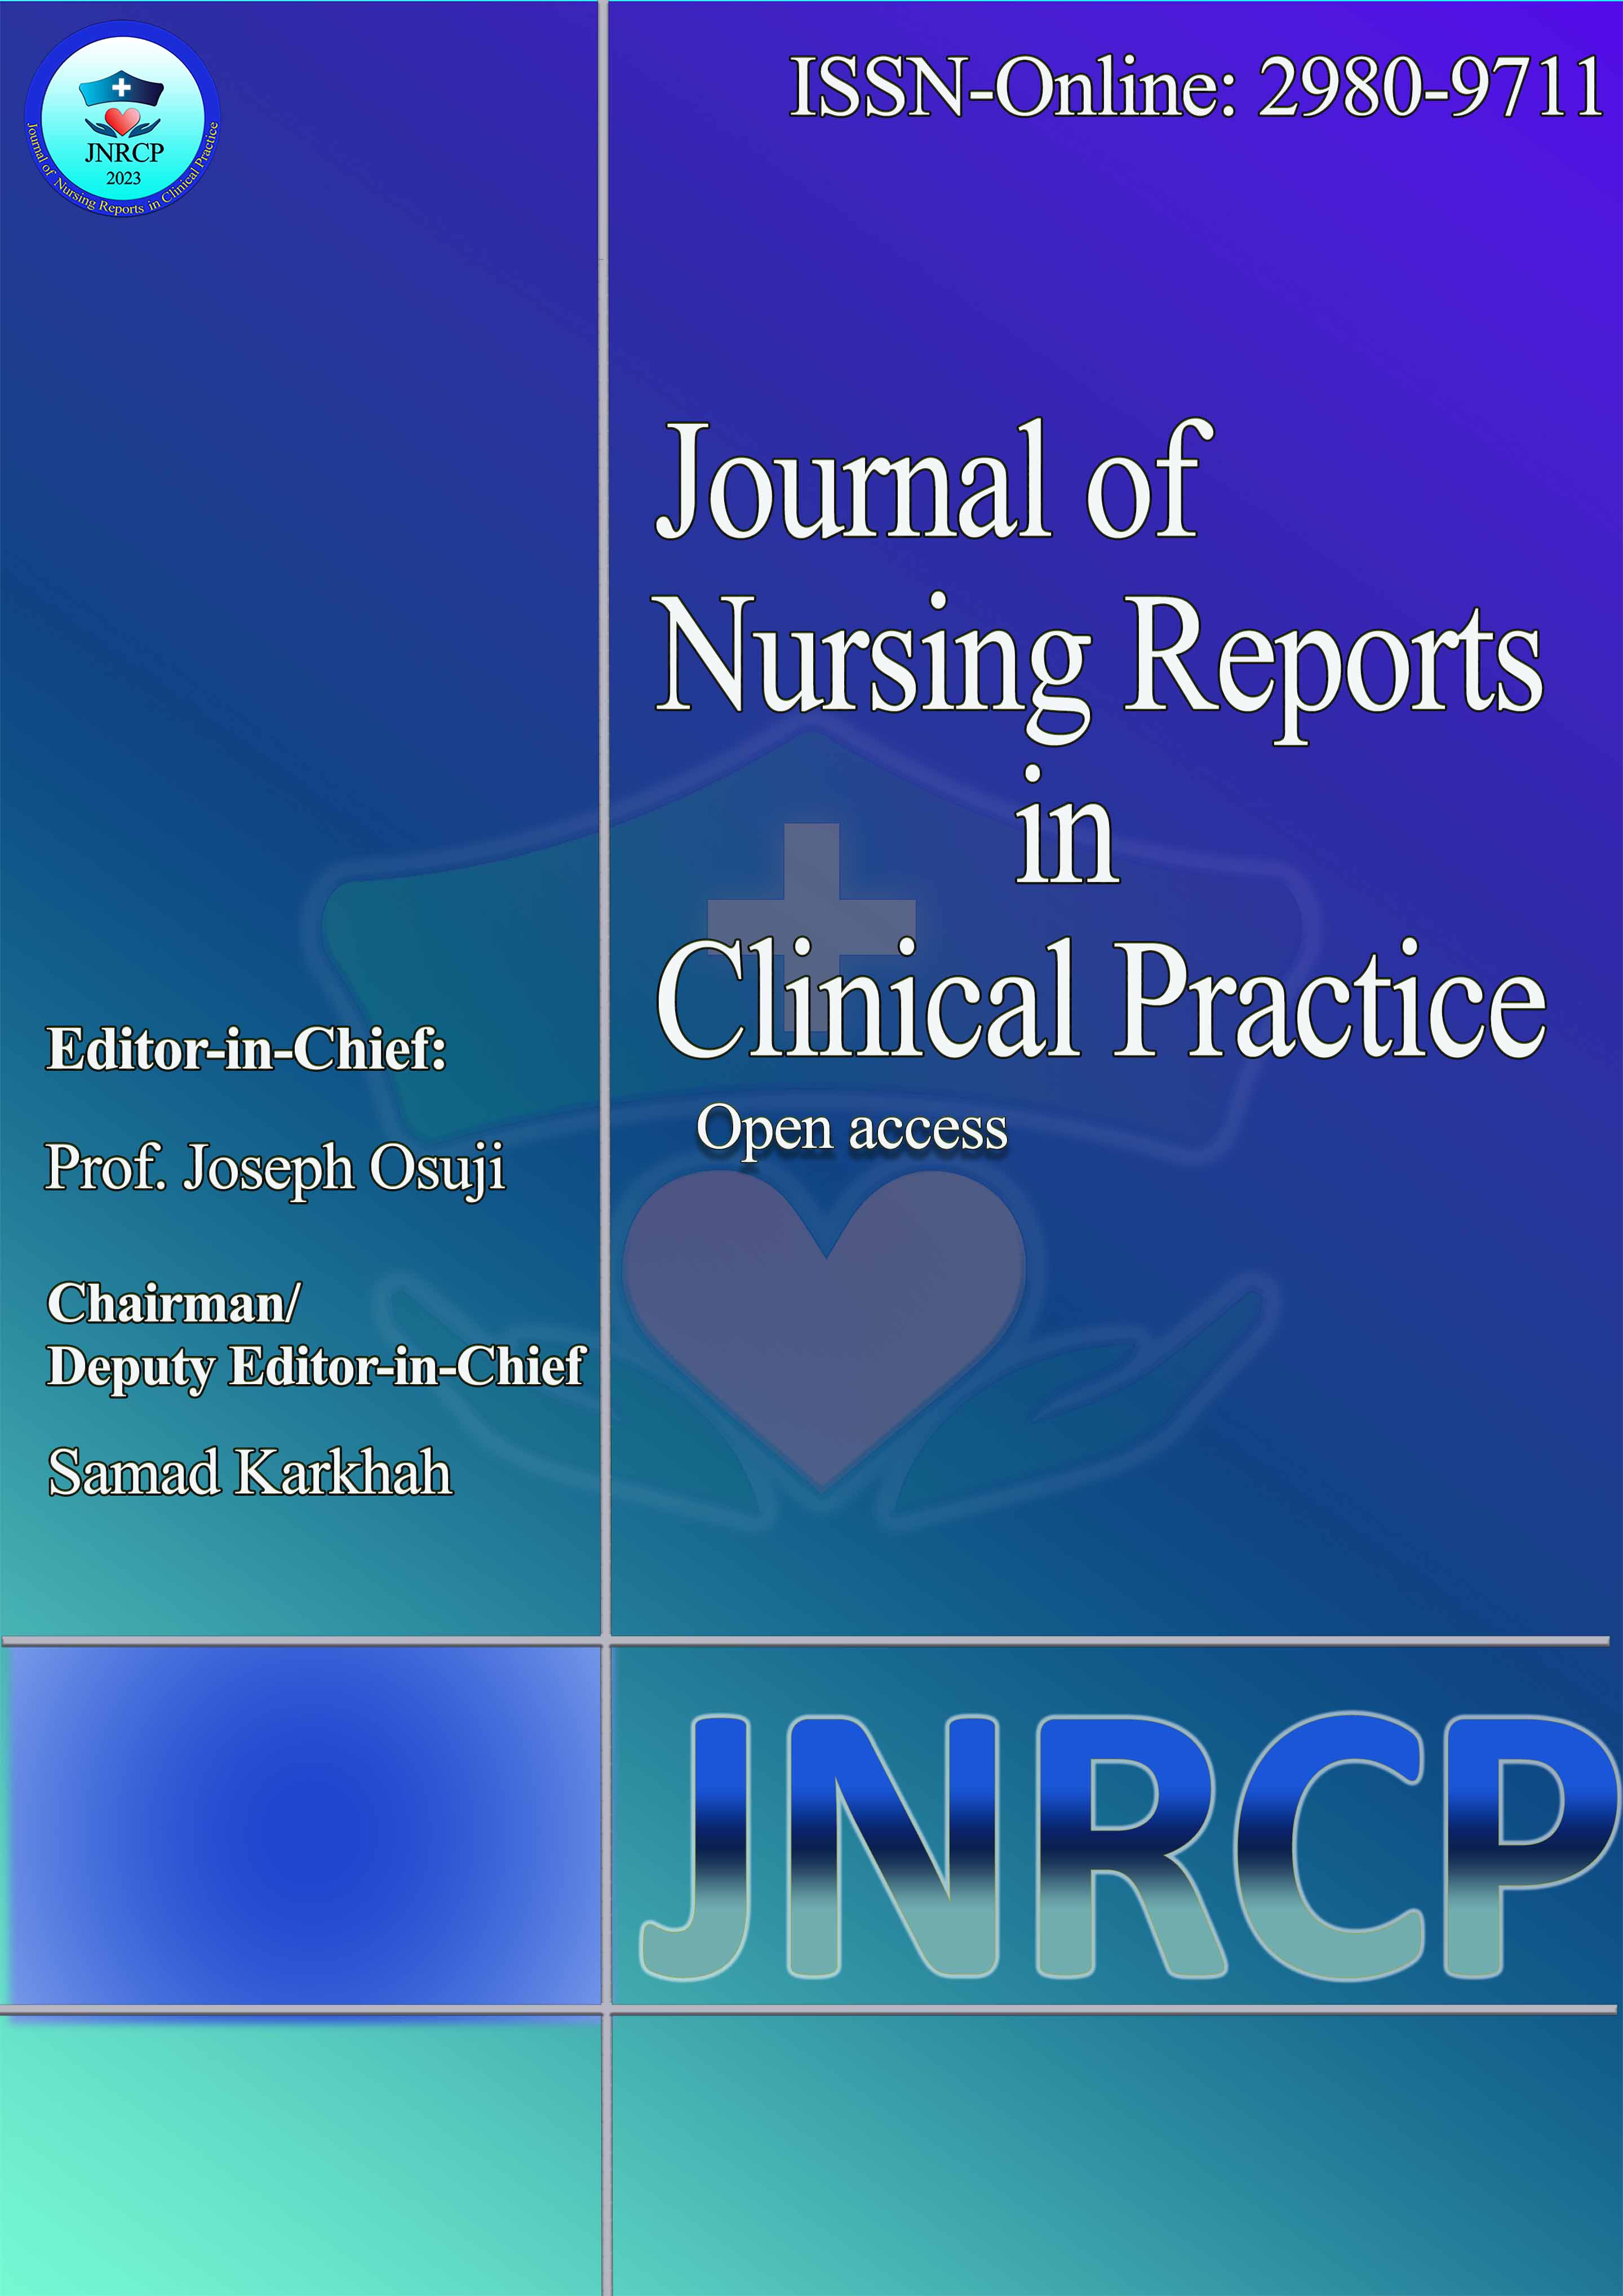 Journal of Nursing Reports in Clinical Practice